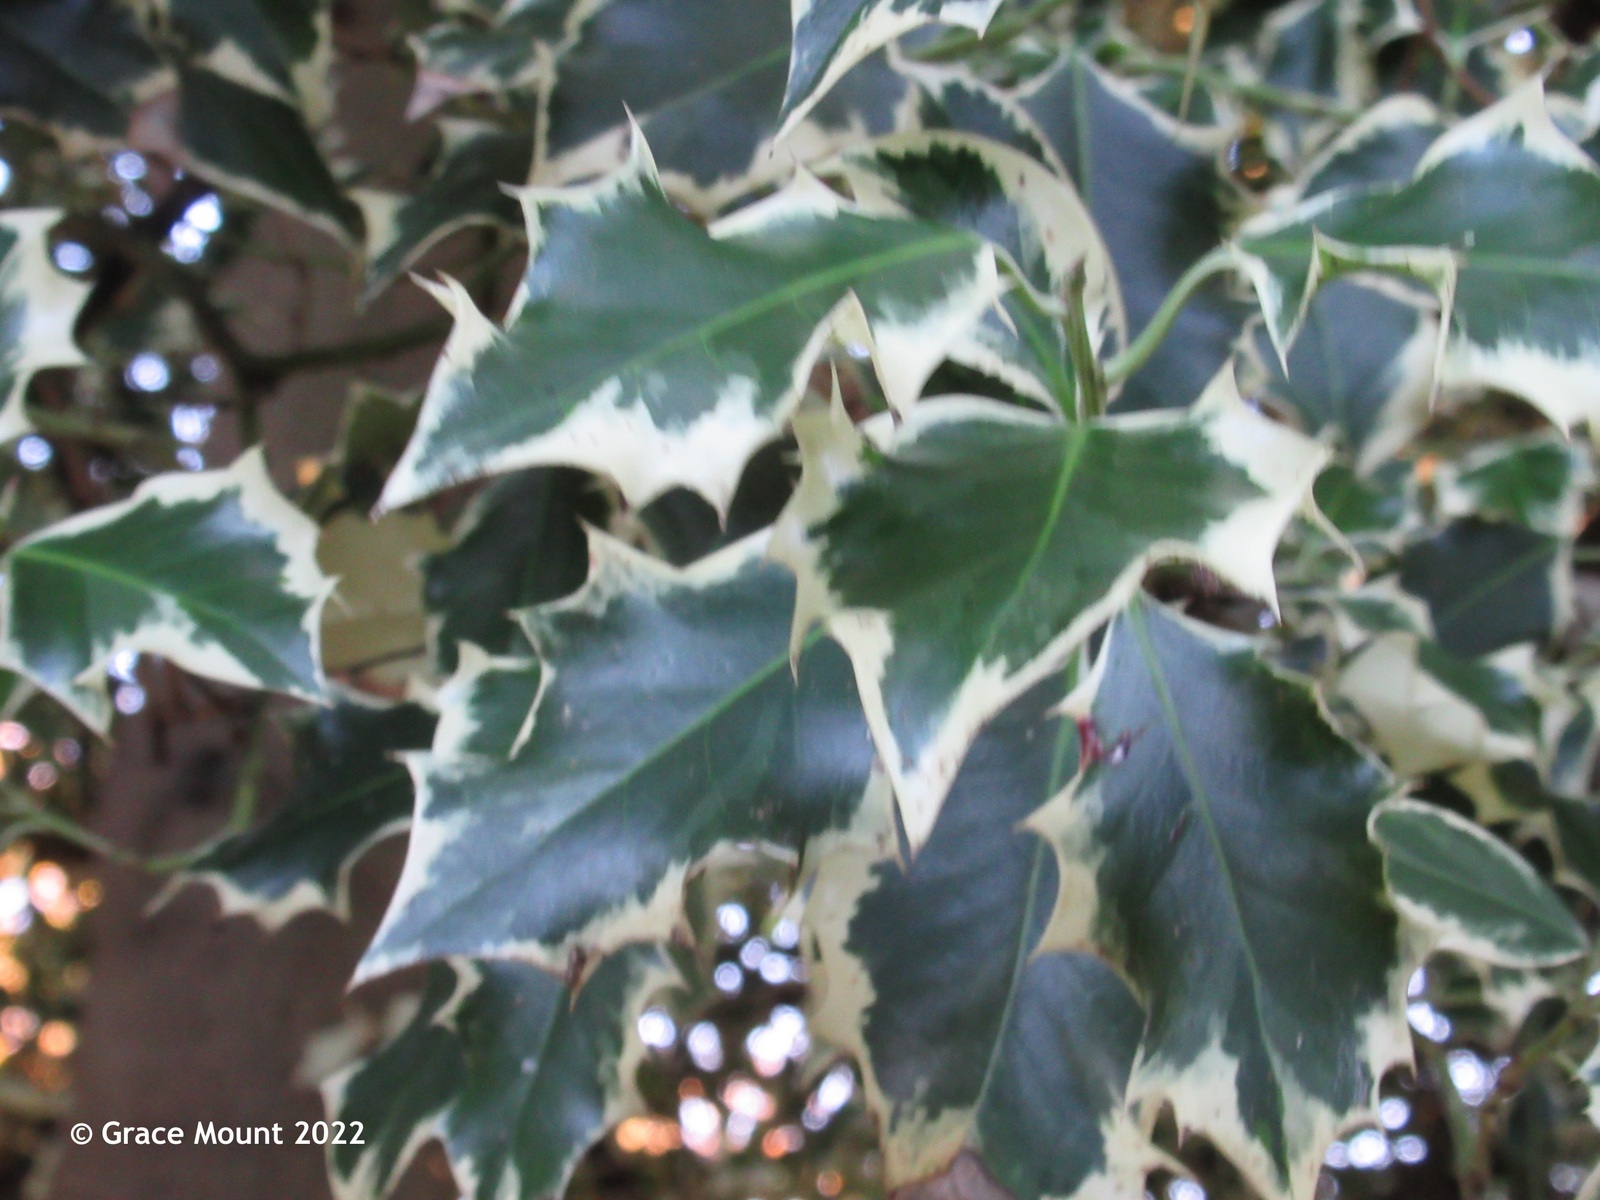 Holly with a variegated leaf growing in the cemetery